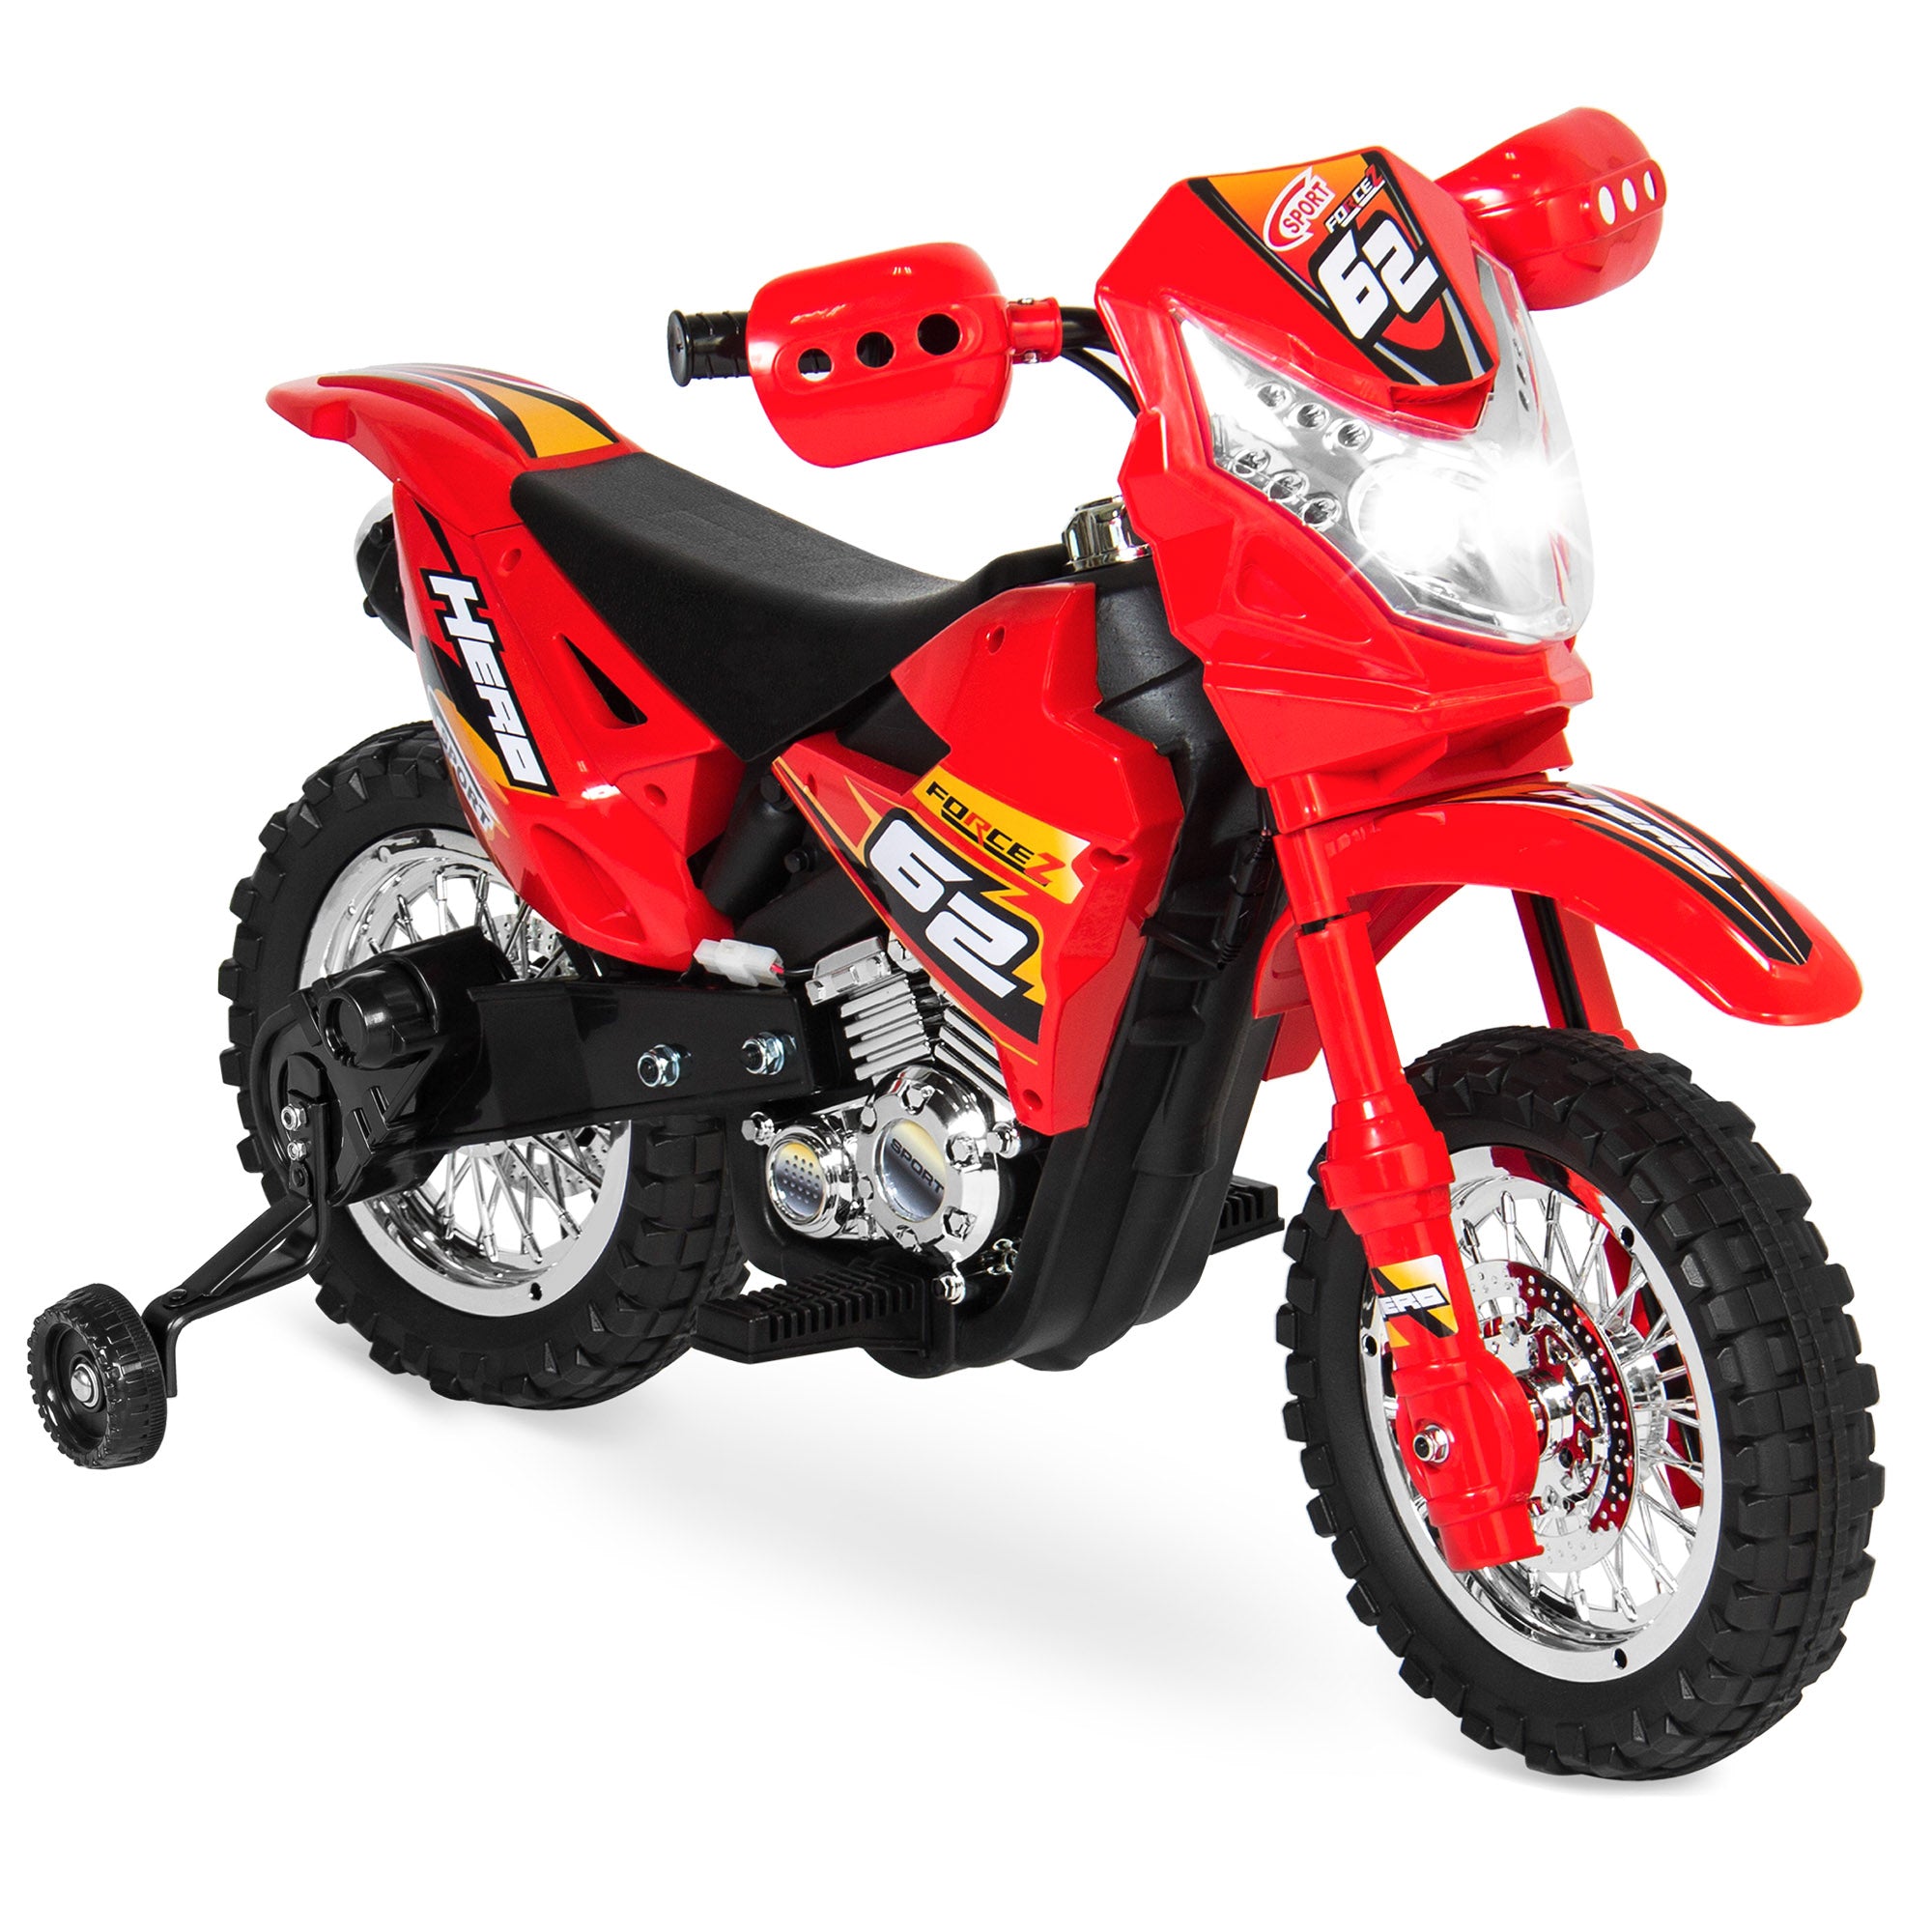 HOMCOM 6V Kids Electric Motorbike Motorcycle Ride On for 3-6 Years Red